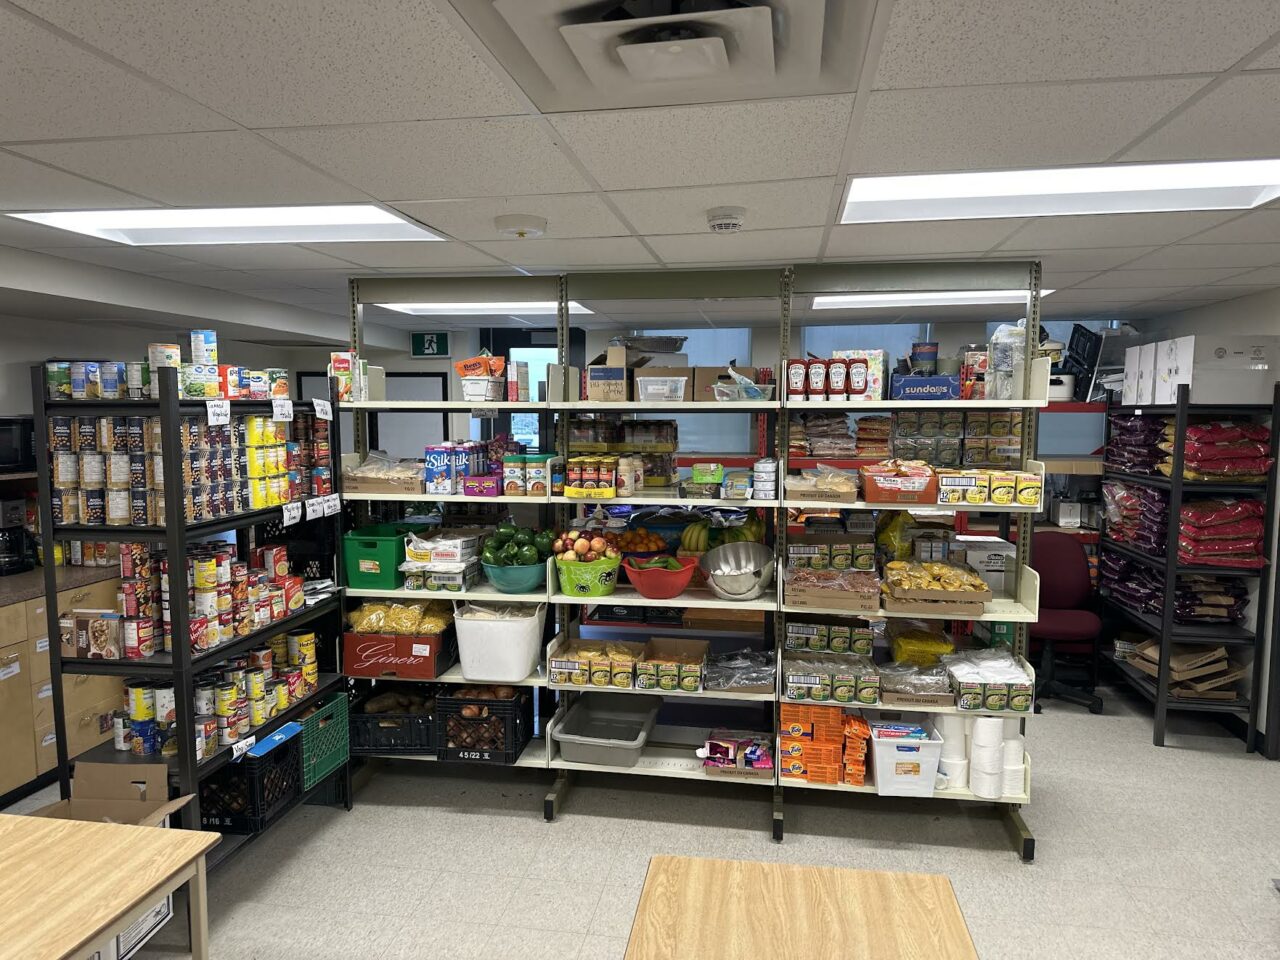 Shelves filled with non perishable foods.